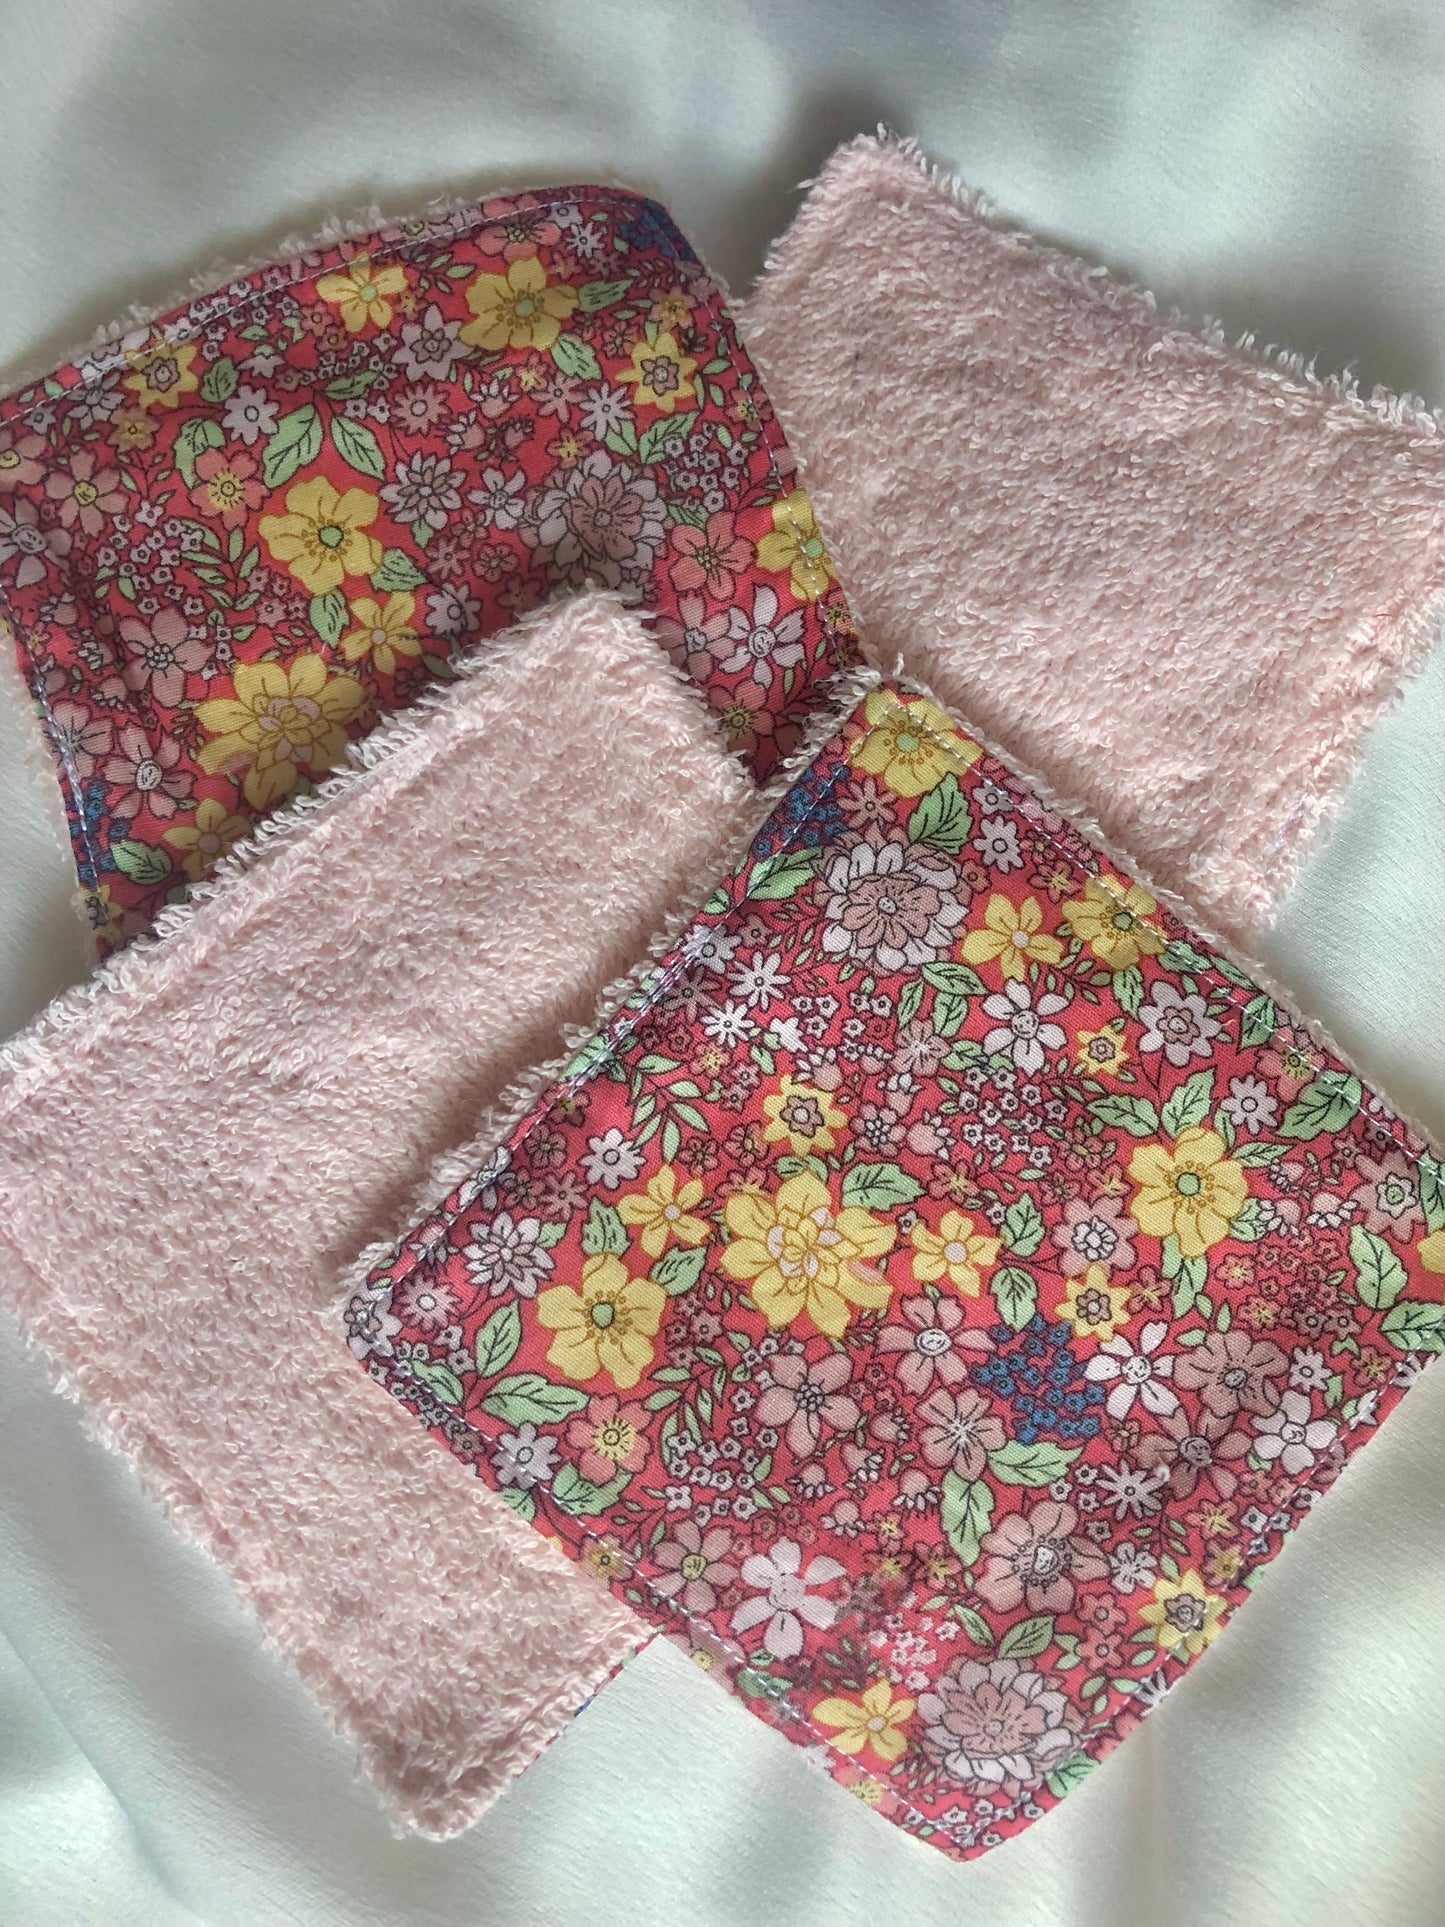 Heather -  Floral Print Reusable Wipes - choose pattern